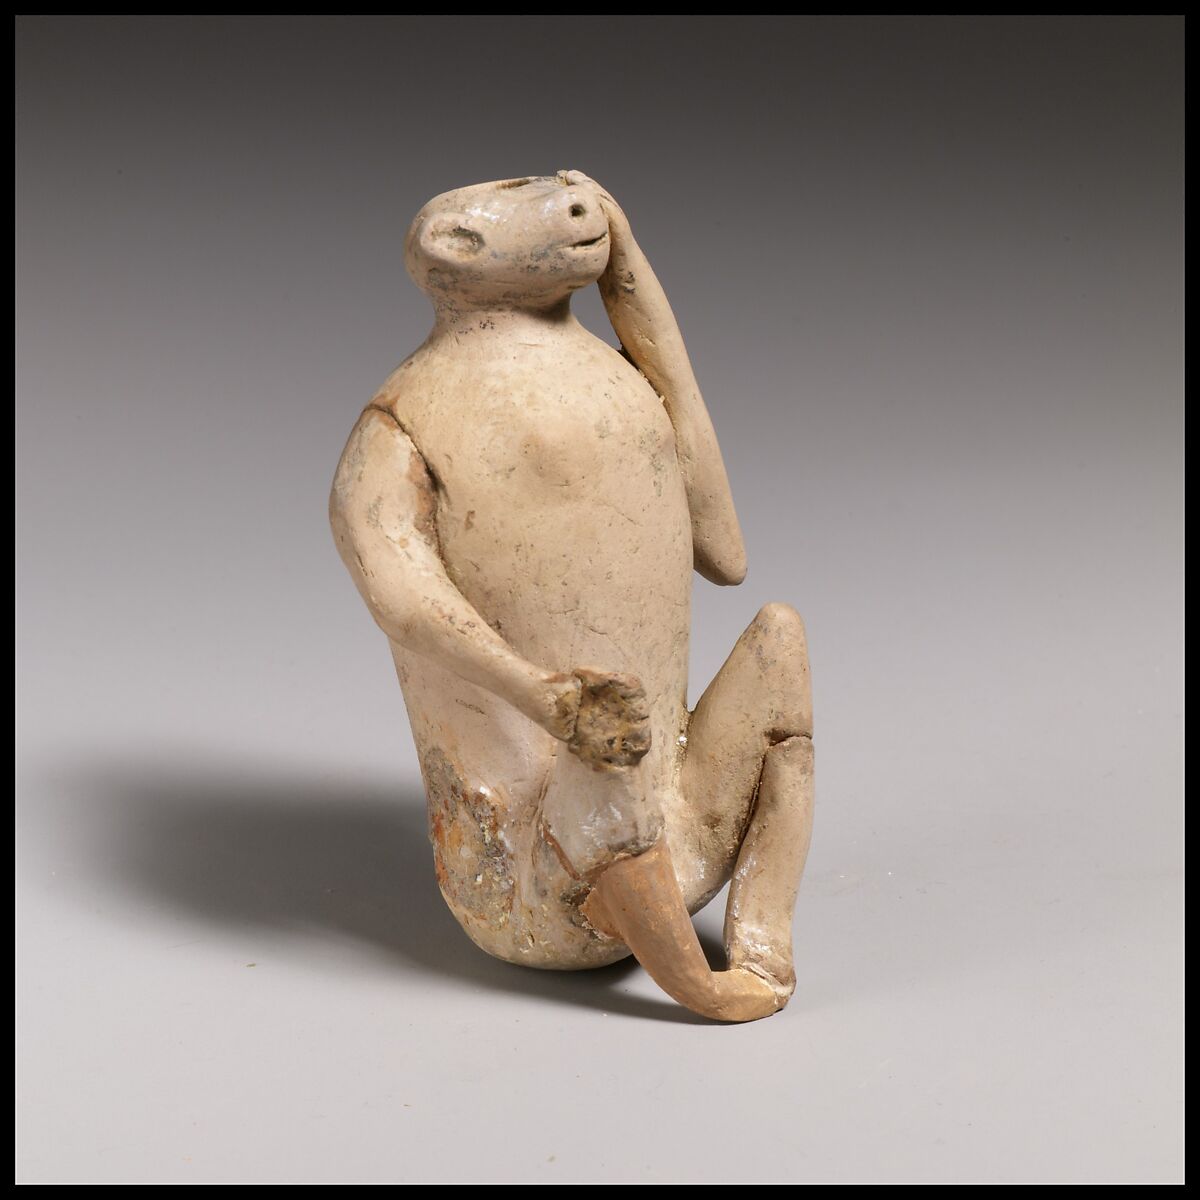 Terracotta vase in the form of an ape, Terracotta, Greek or Etruscan 